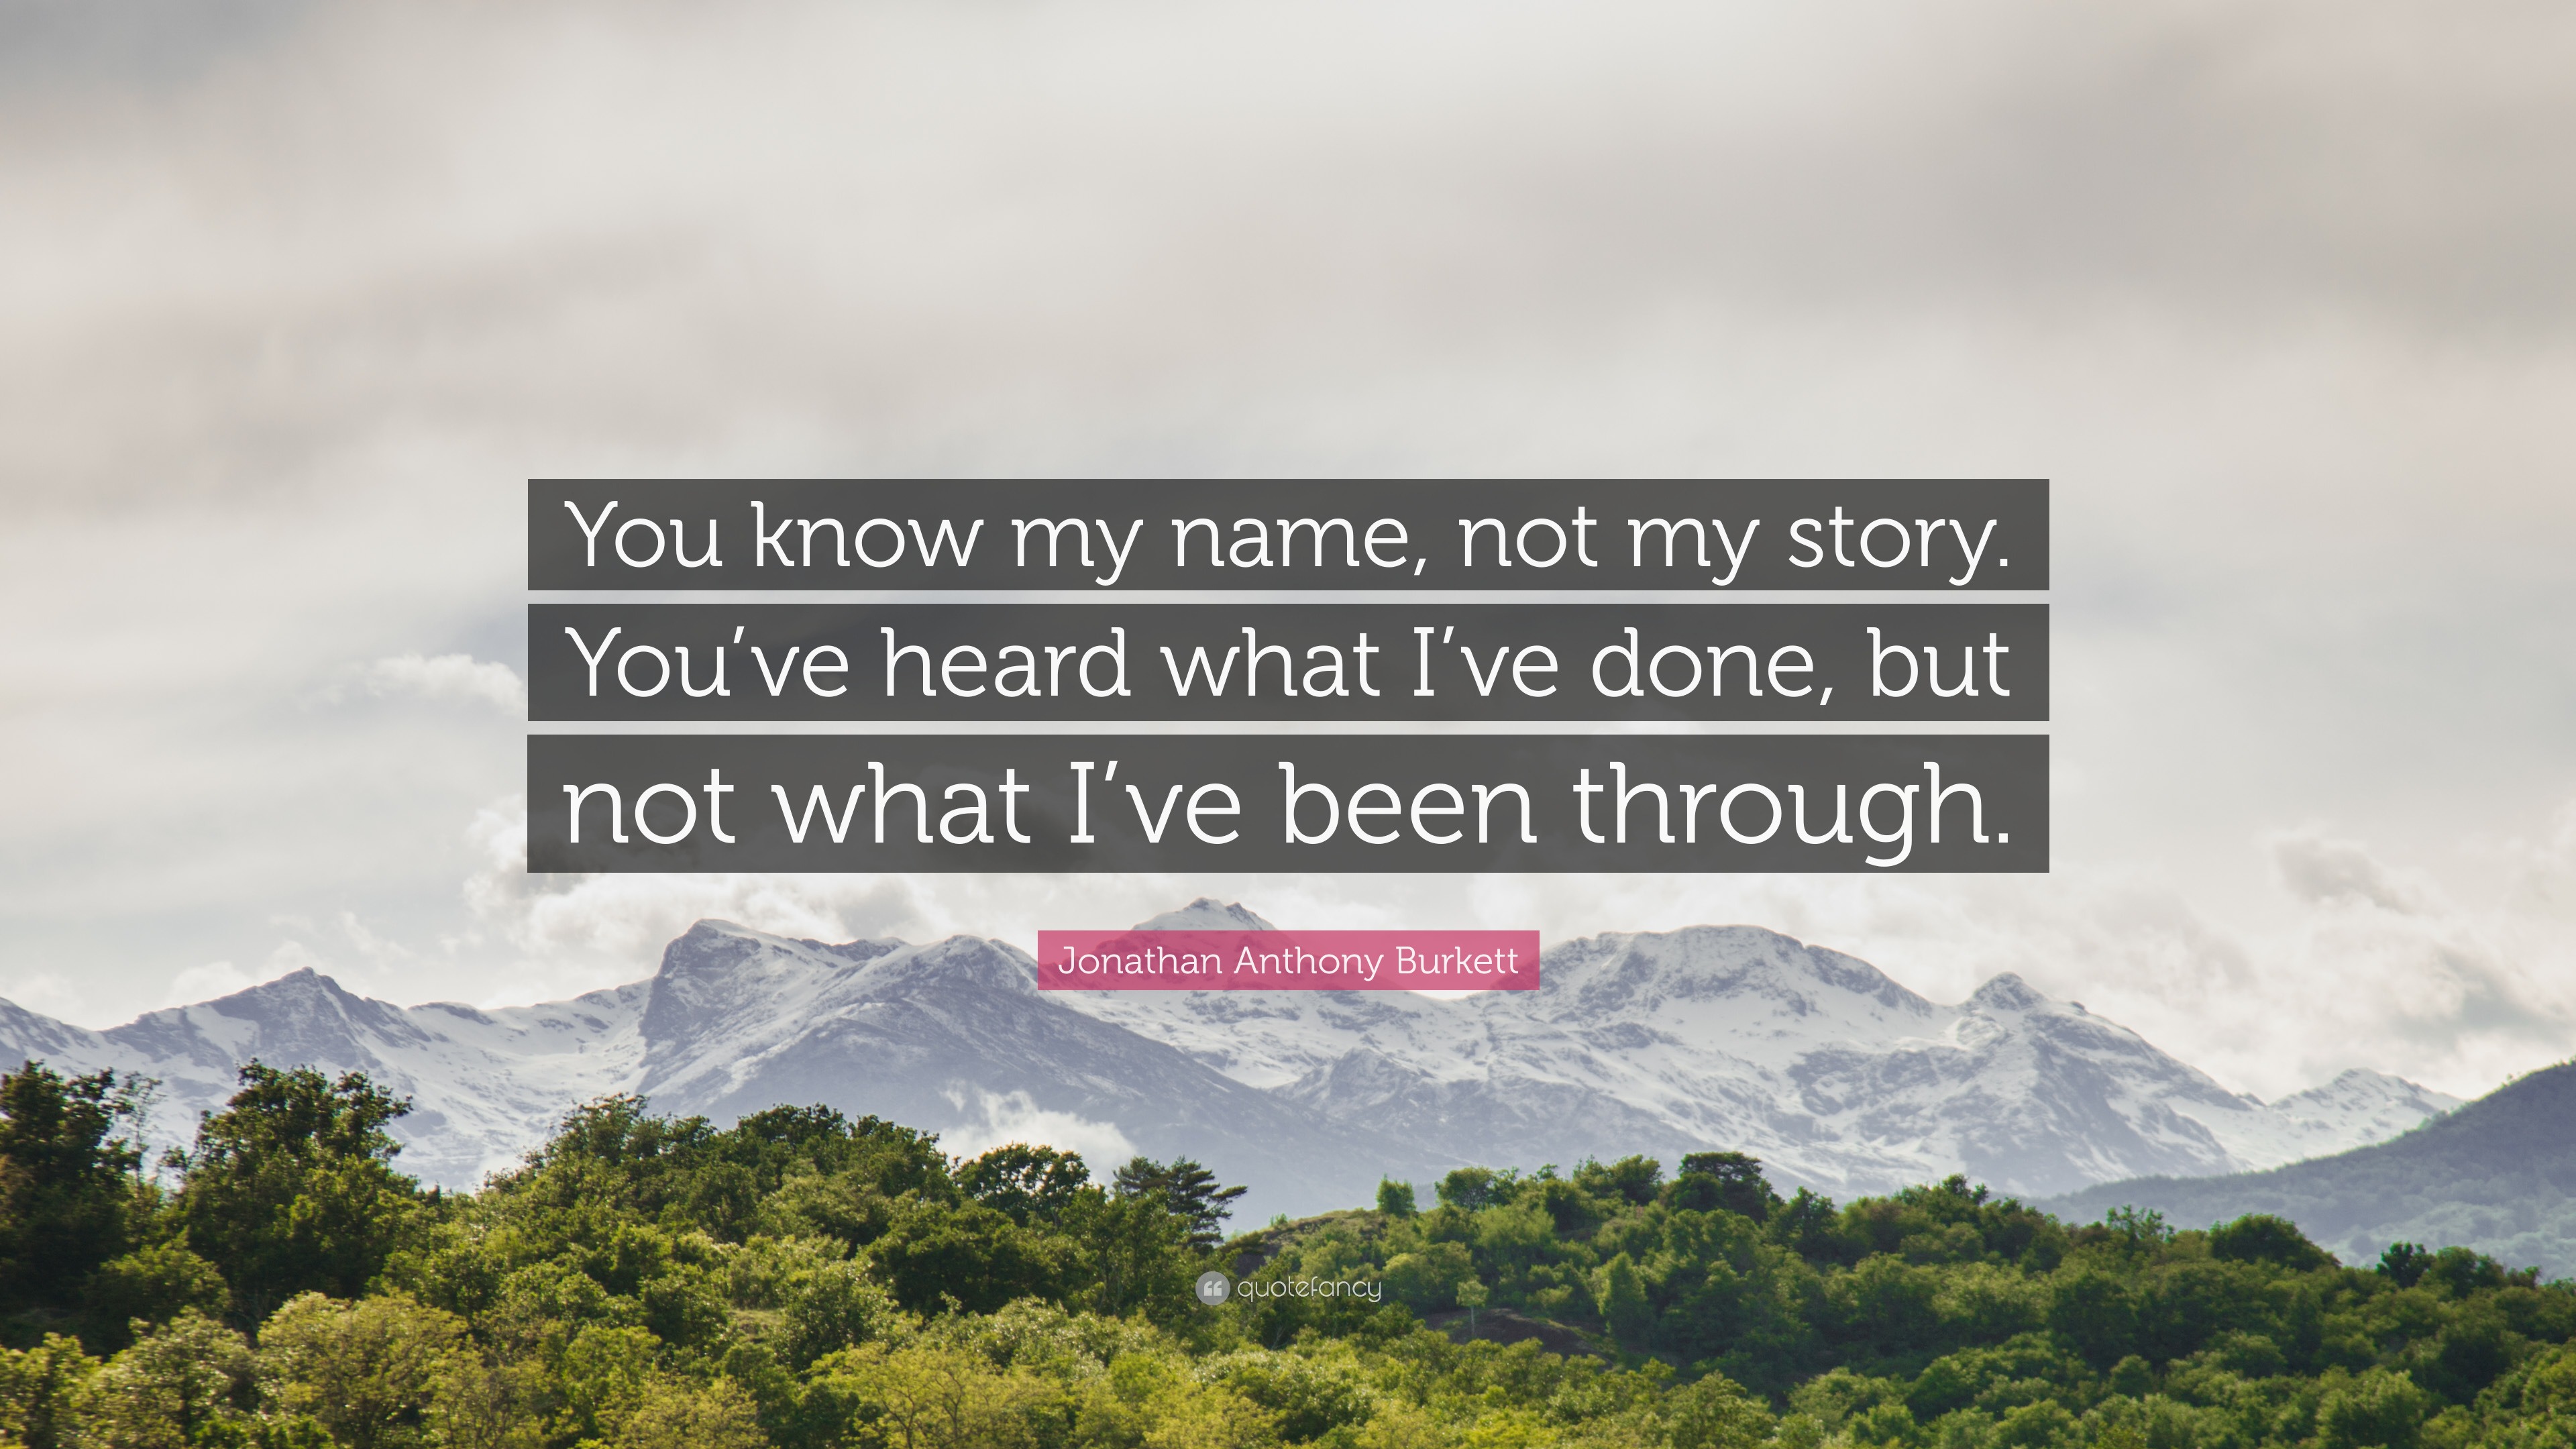 You know my name not my story  Quotes, Wisdom quotes, True quotes